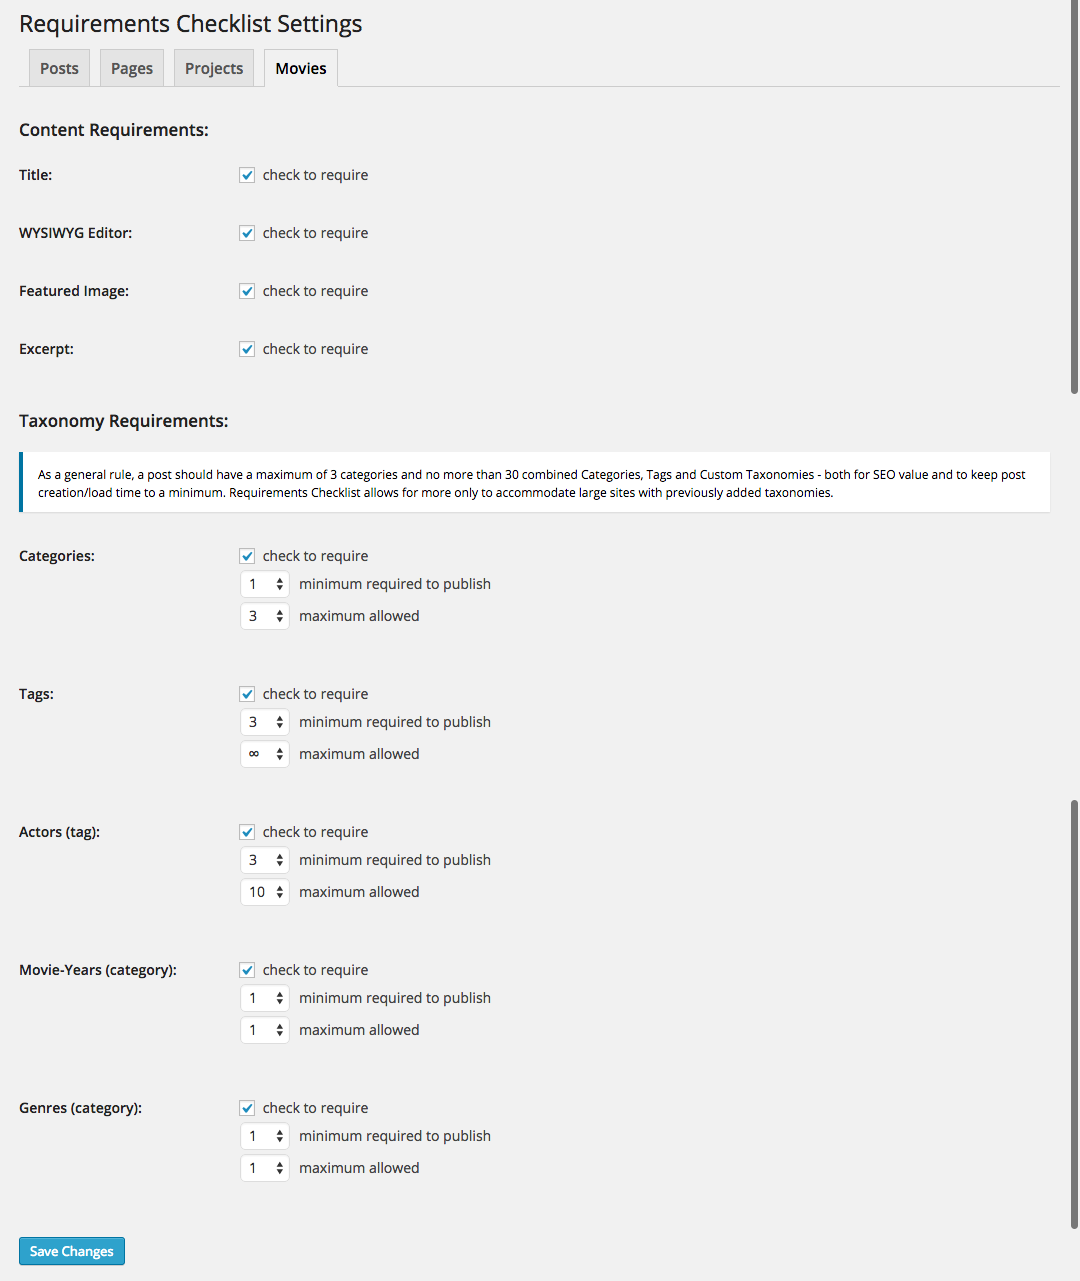 Settings page (showing custom post type "Movies" with multiple custom taxonomies)